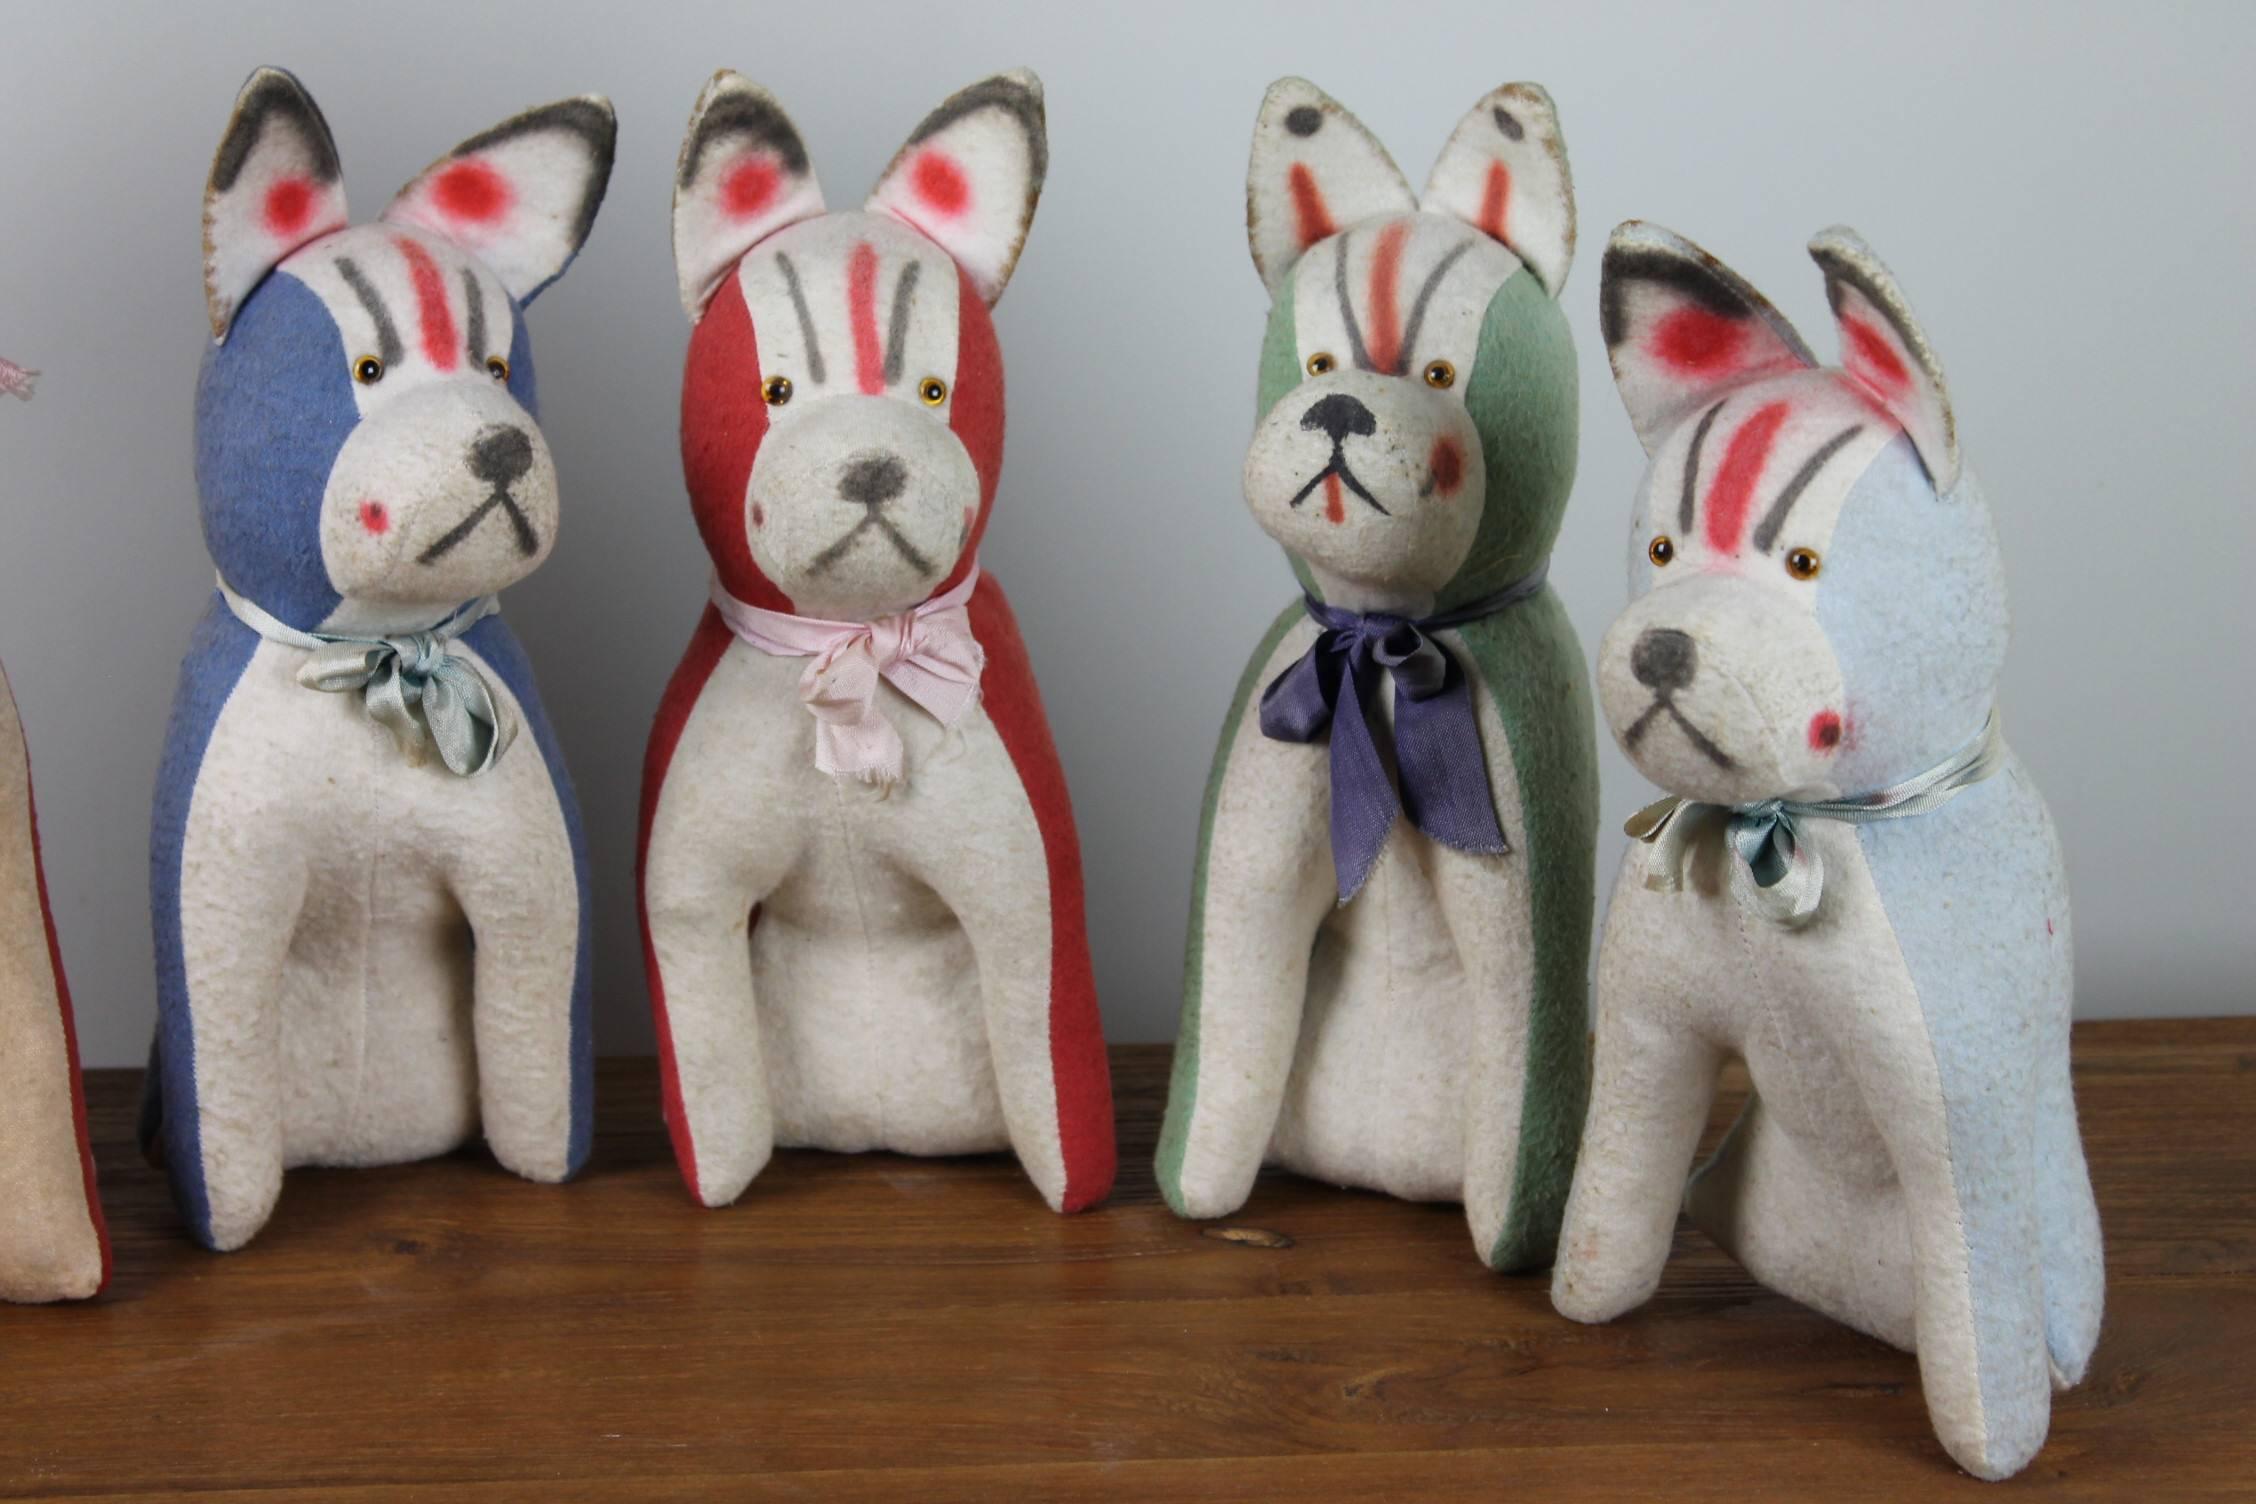 Set of 5 German stuffed Fabric Frenchies - Bully's - French Bulldog Figurines Toys -handmade in the early 20th-Century. 
They are stuffed with straw and are still in very good shape.  
Multi colored group of Toy Dogs.
Lovely Decoration Pieces or Dog